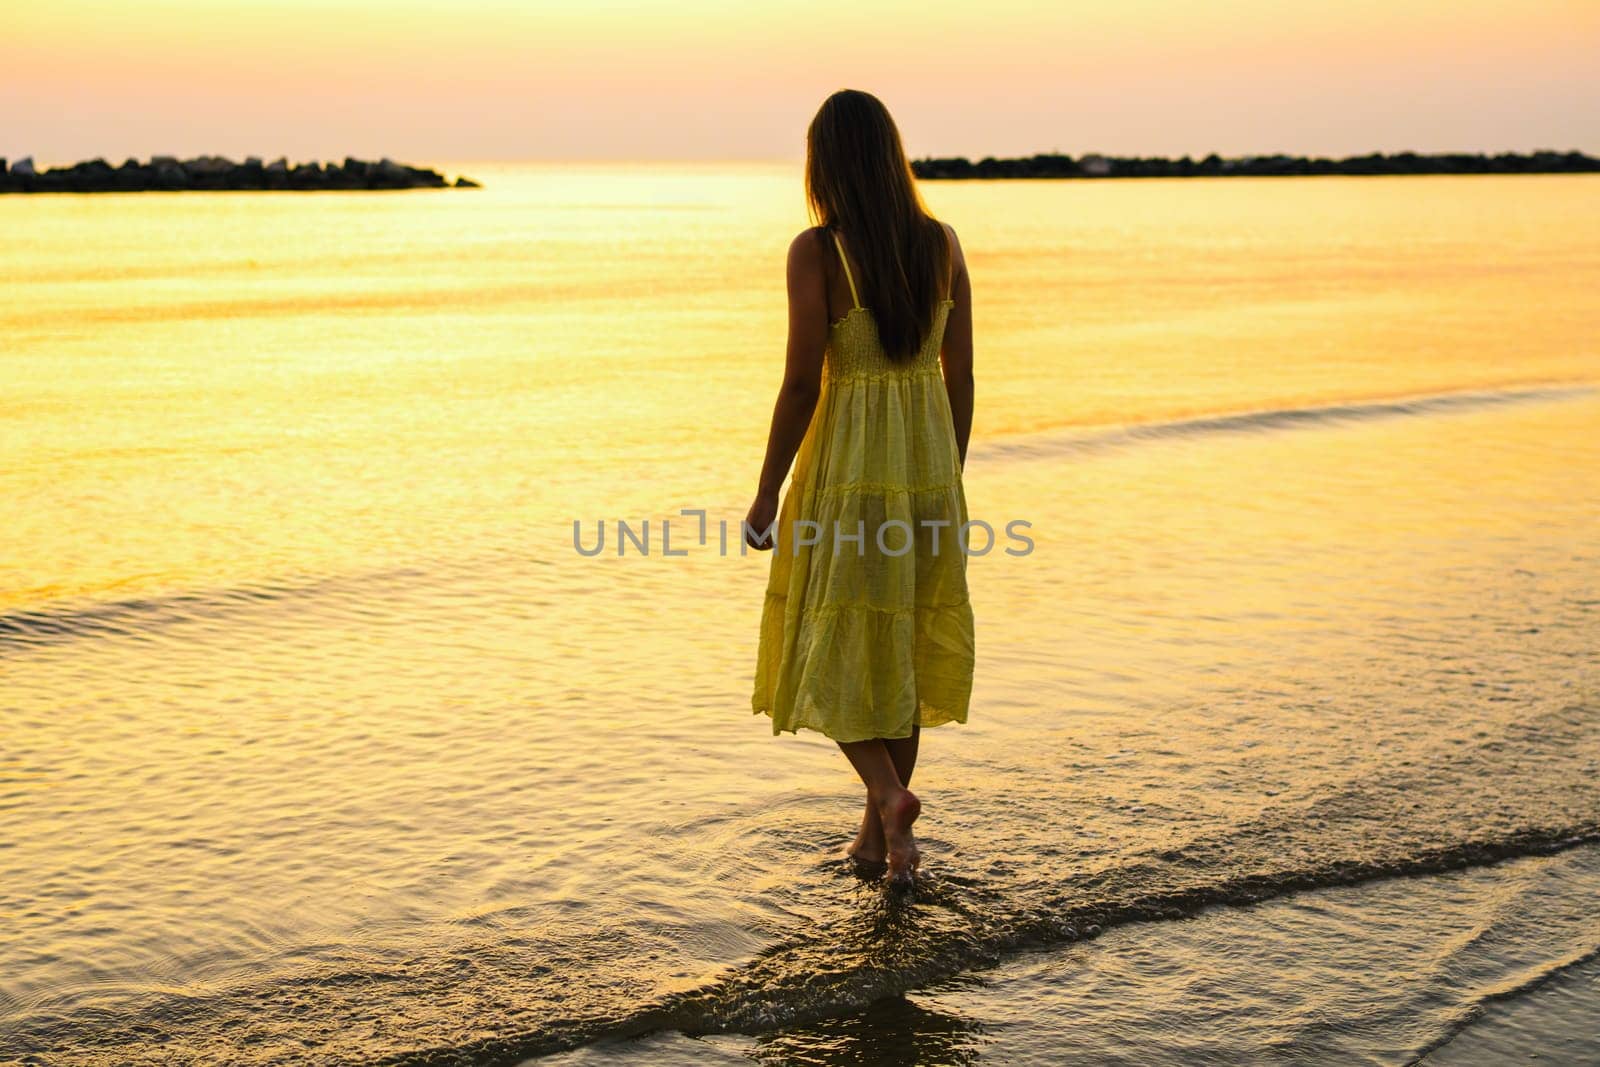 A young woman stands on the beach watching the sunrise.